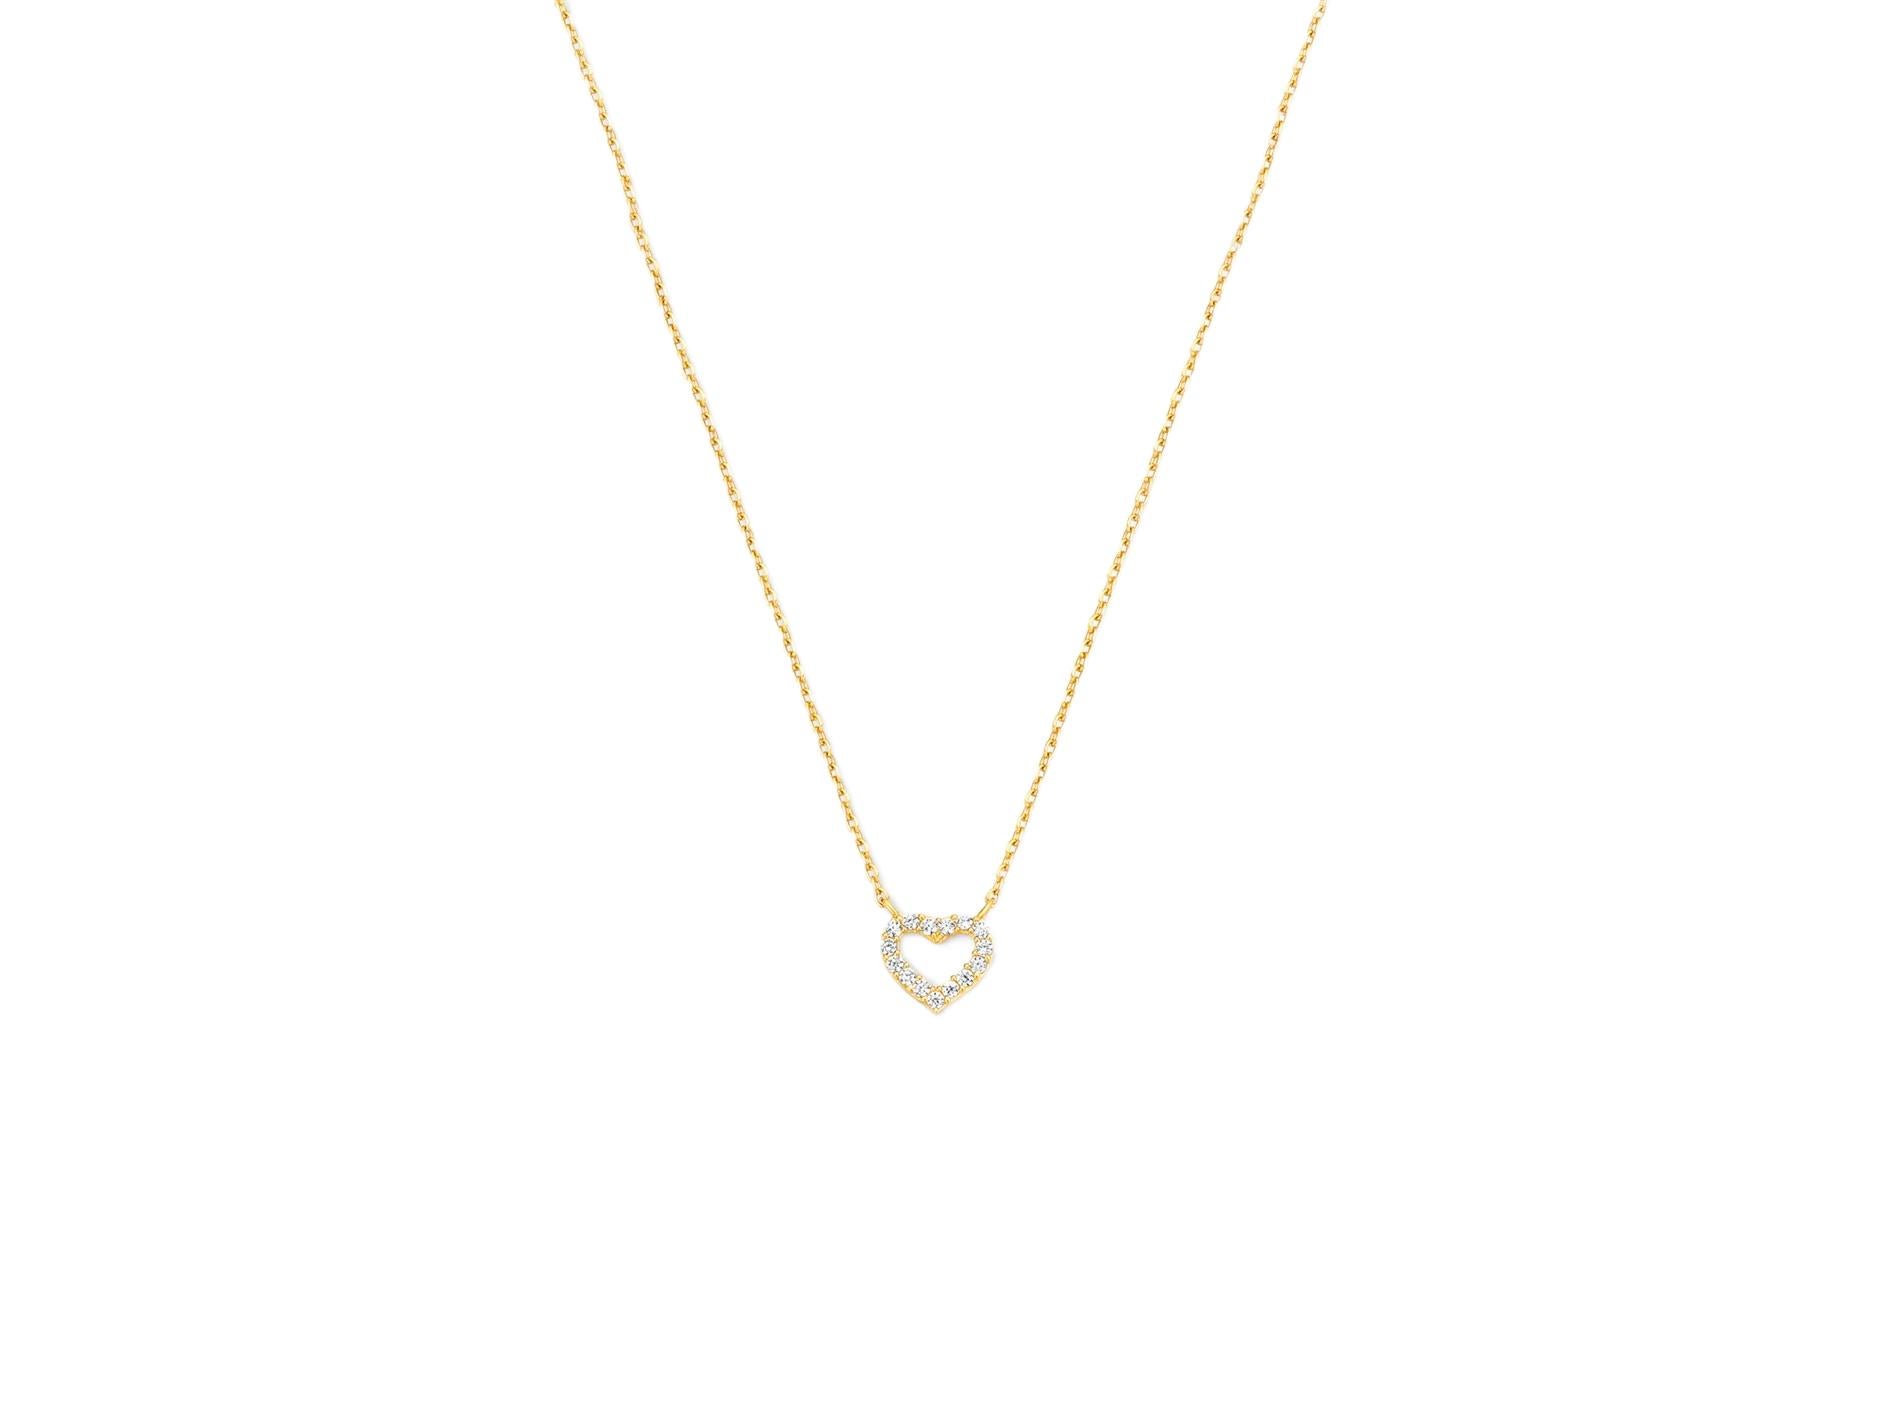 Modern 14k Solid Gold Heart Pendant Necklace, Tiny Heart Charm Gold Chain Necklace For Sale